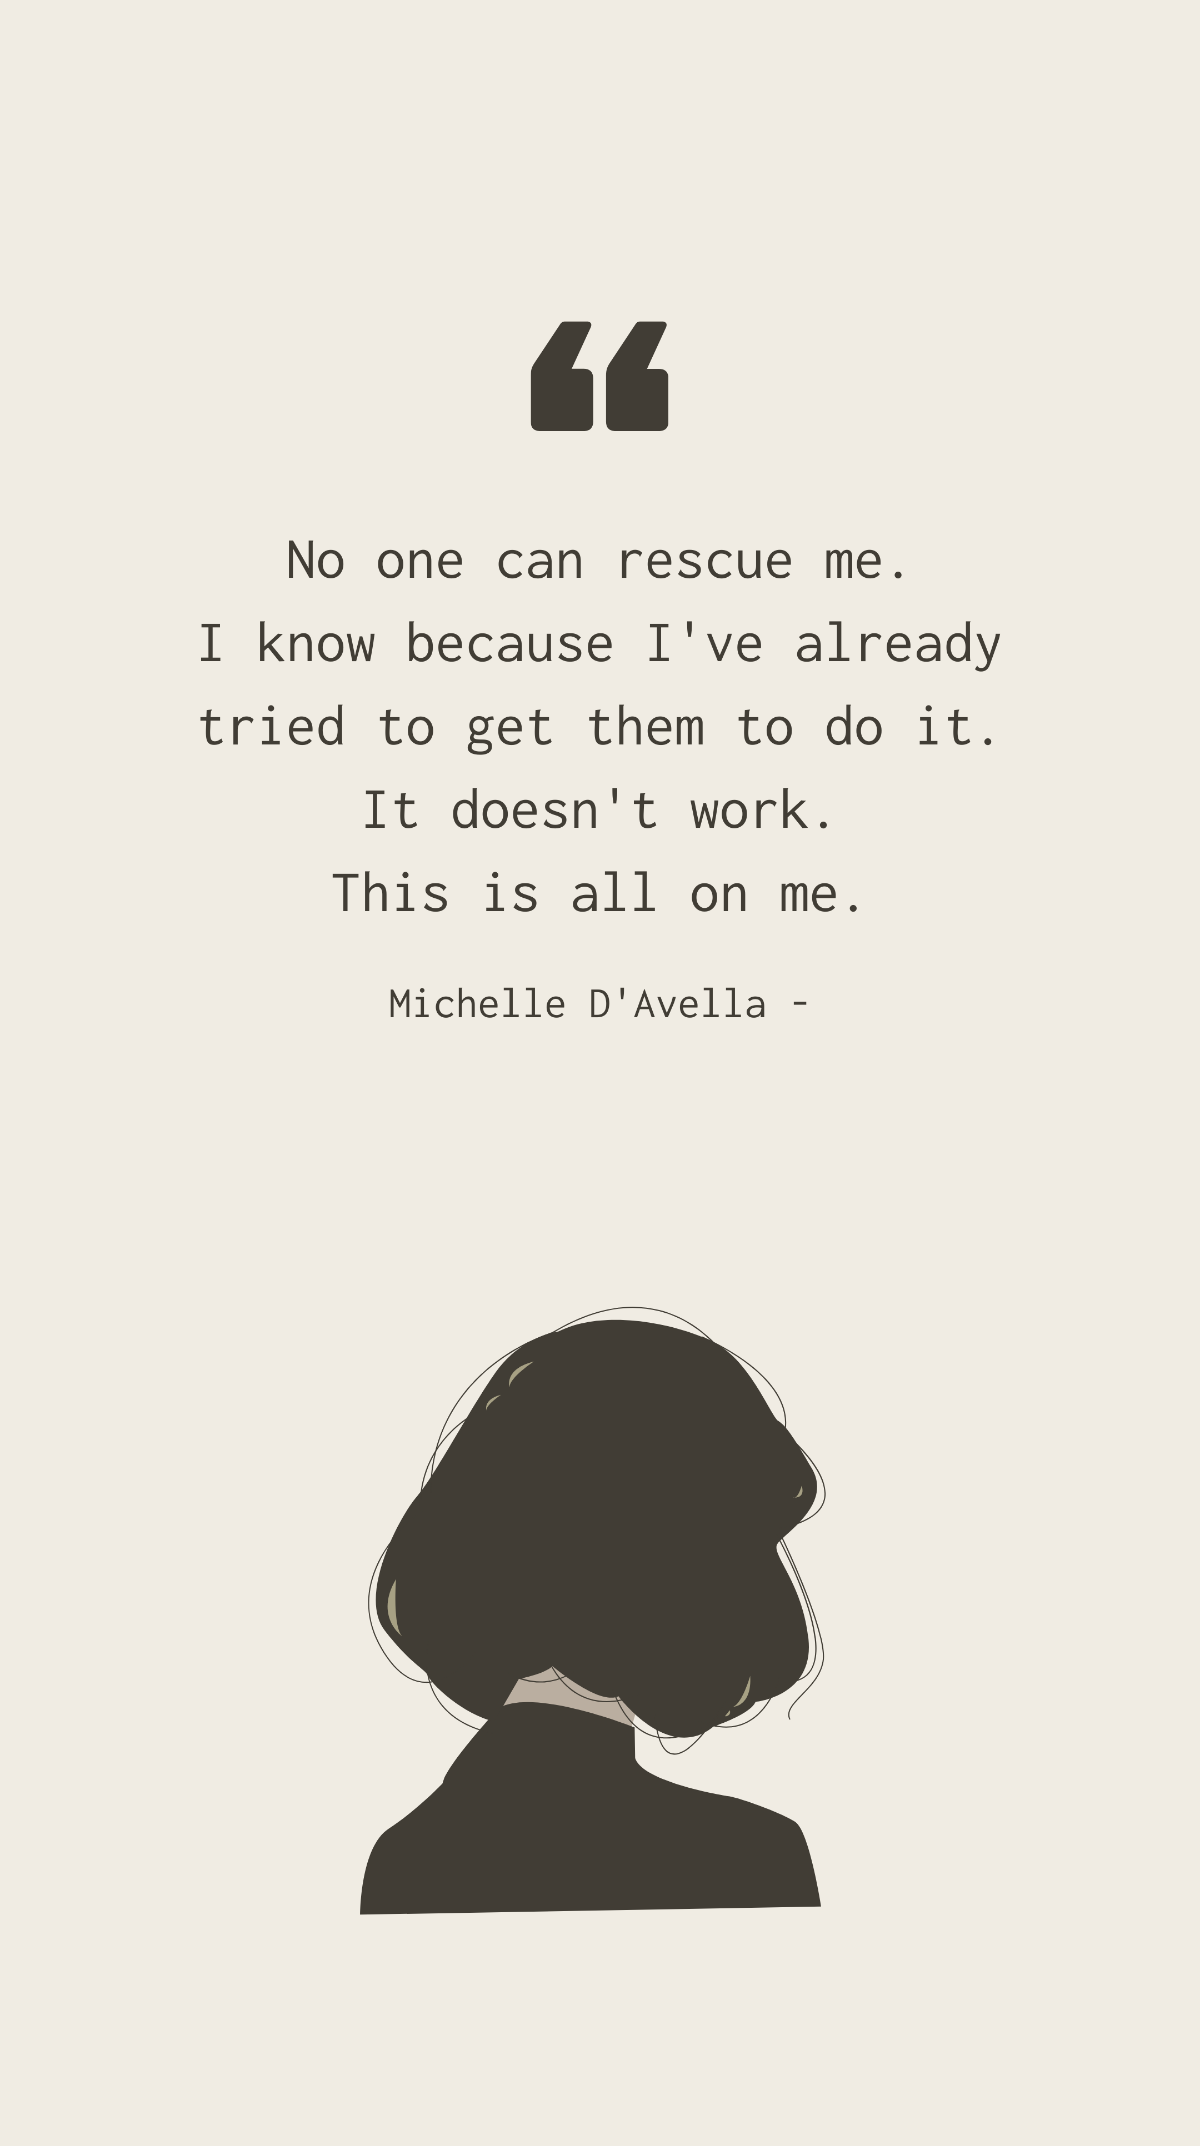 Michelle D'Avella - No one can rescue me. I know because I've already tried to get them to do it. It doesn't work. This is all on me.